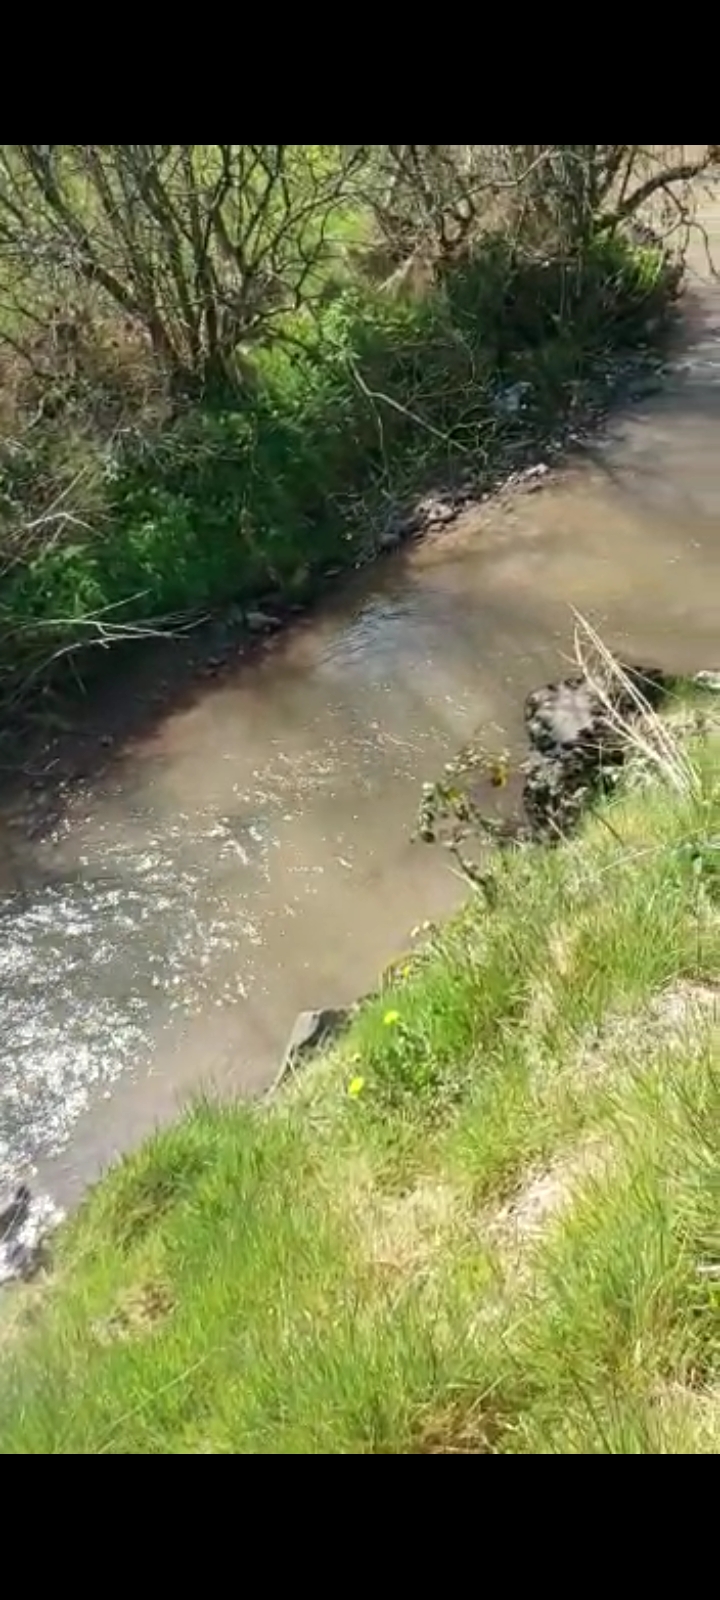 Concerns raised over latest pollution of Camowen River